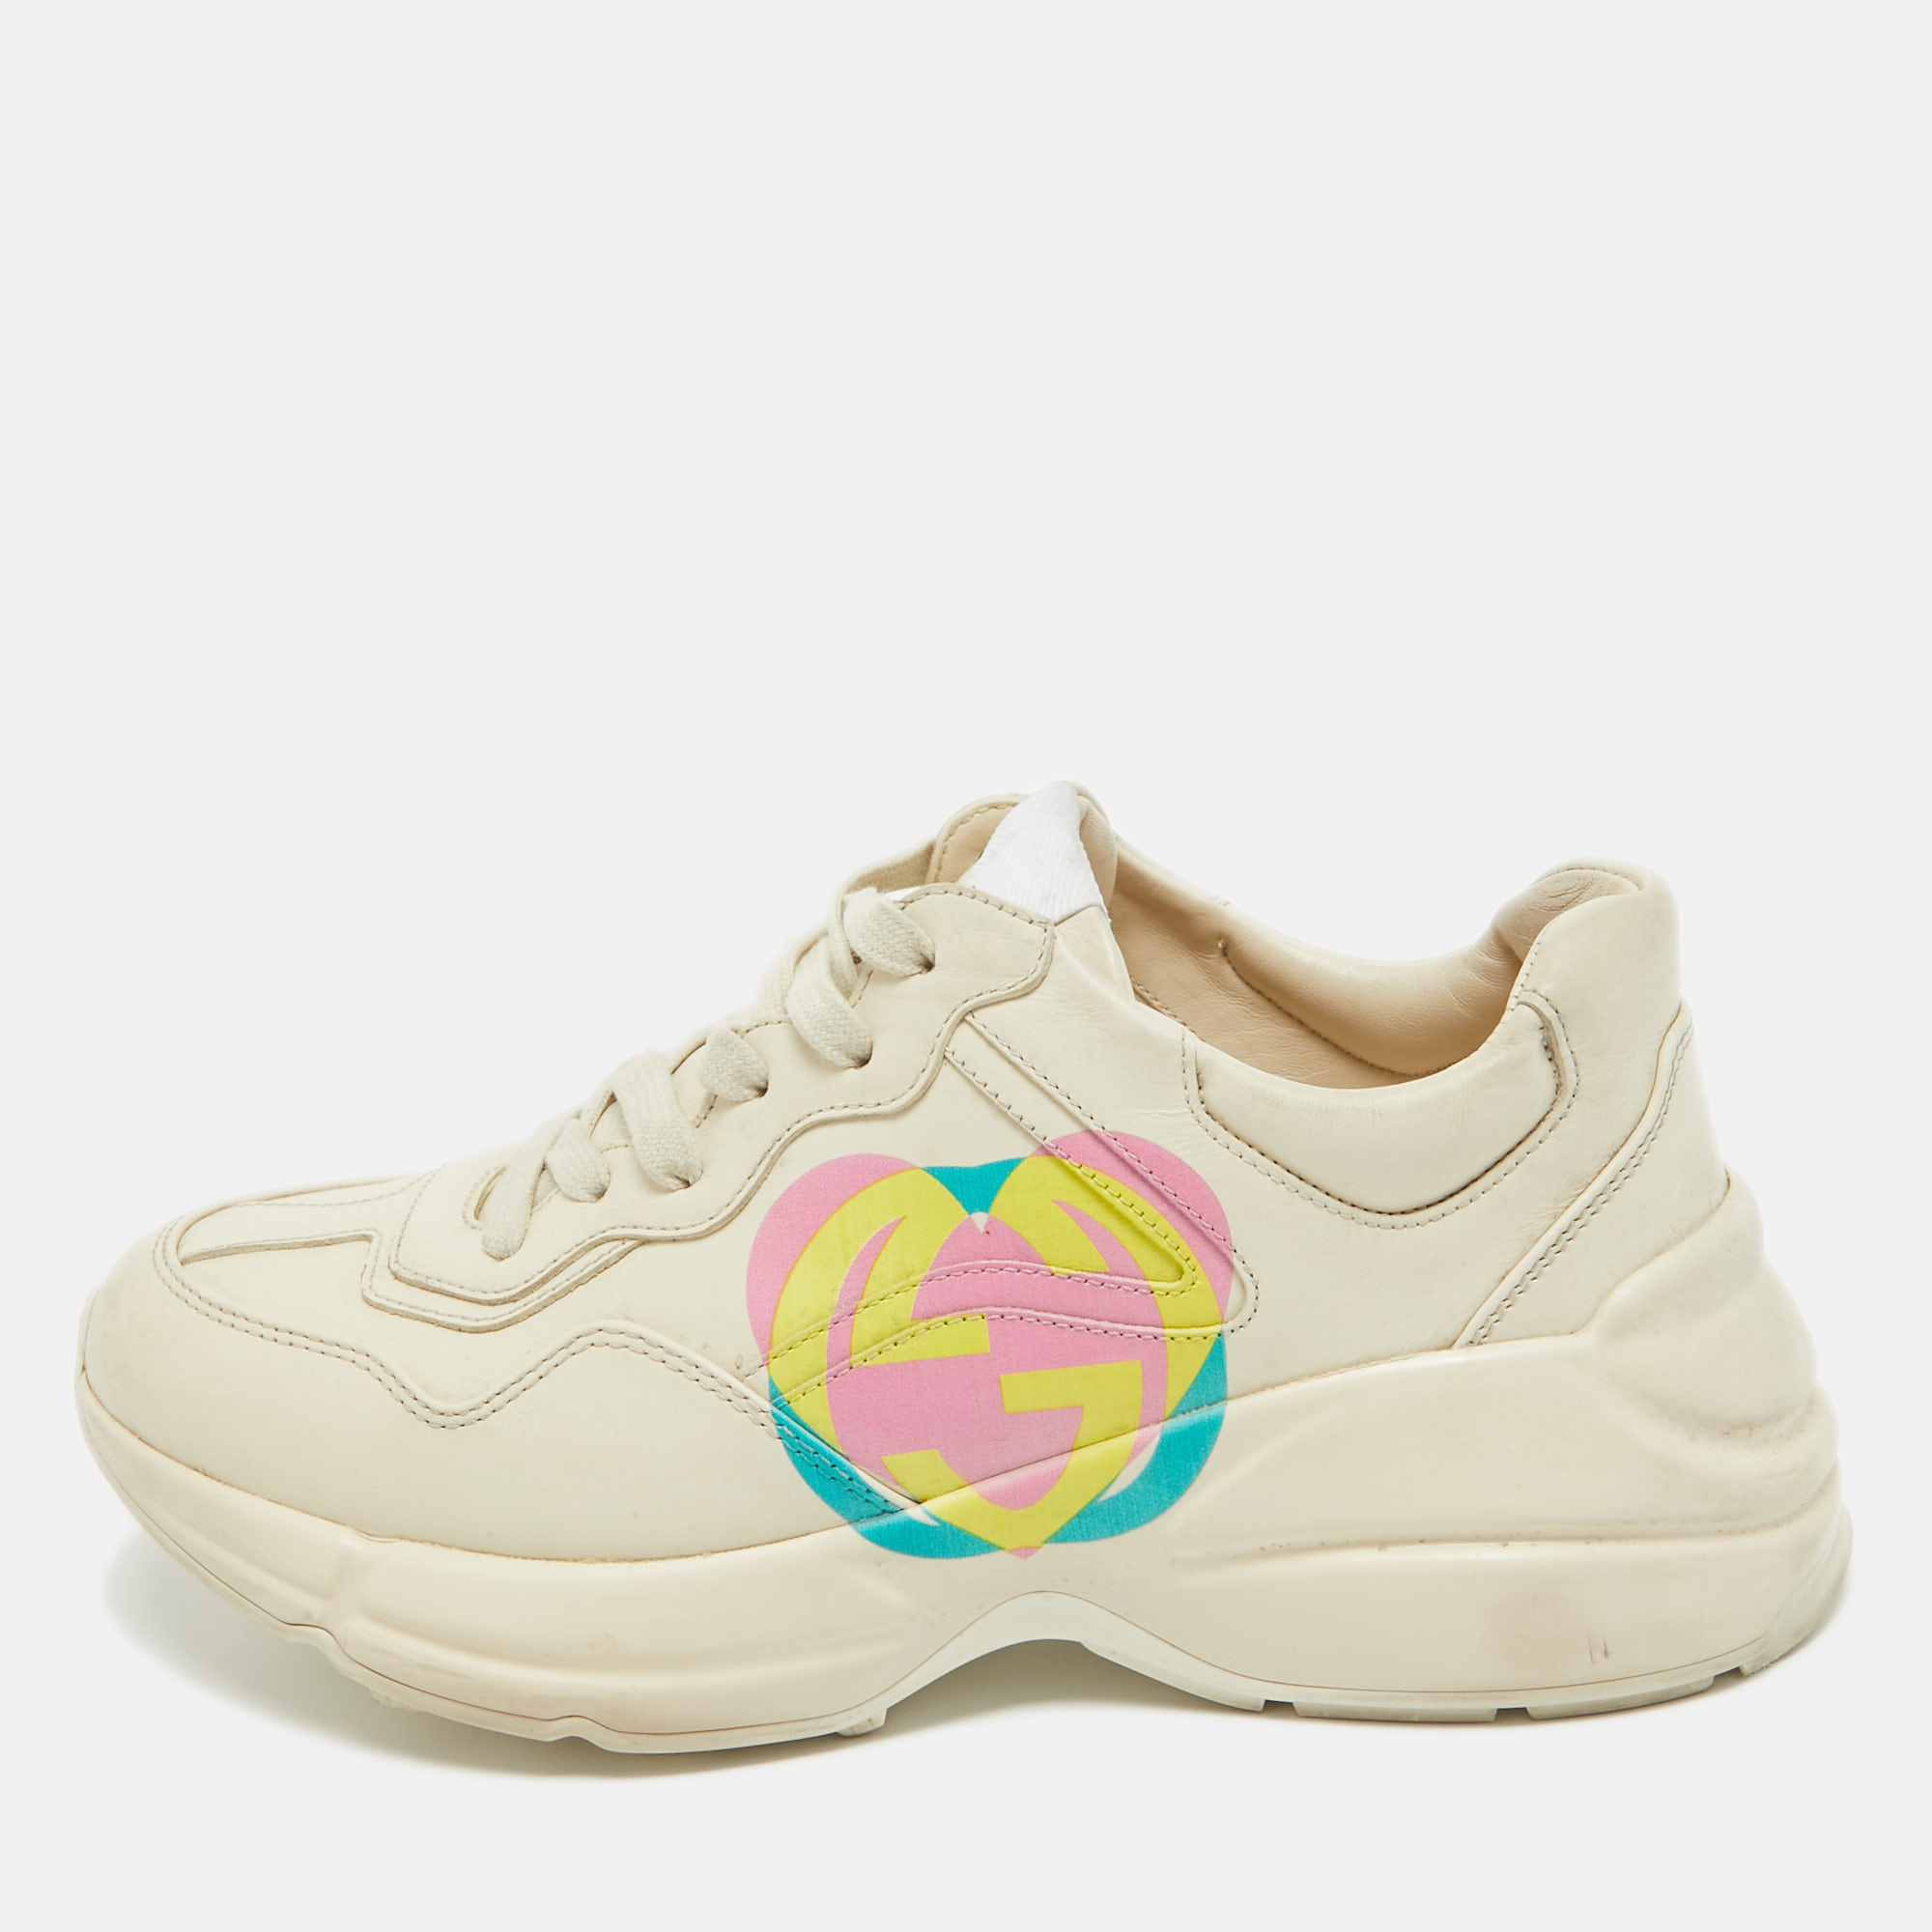 Pre-owned Gucci Cream Leather Gg Heart Rhyton Sneakers Size 38